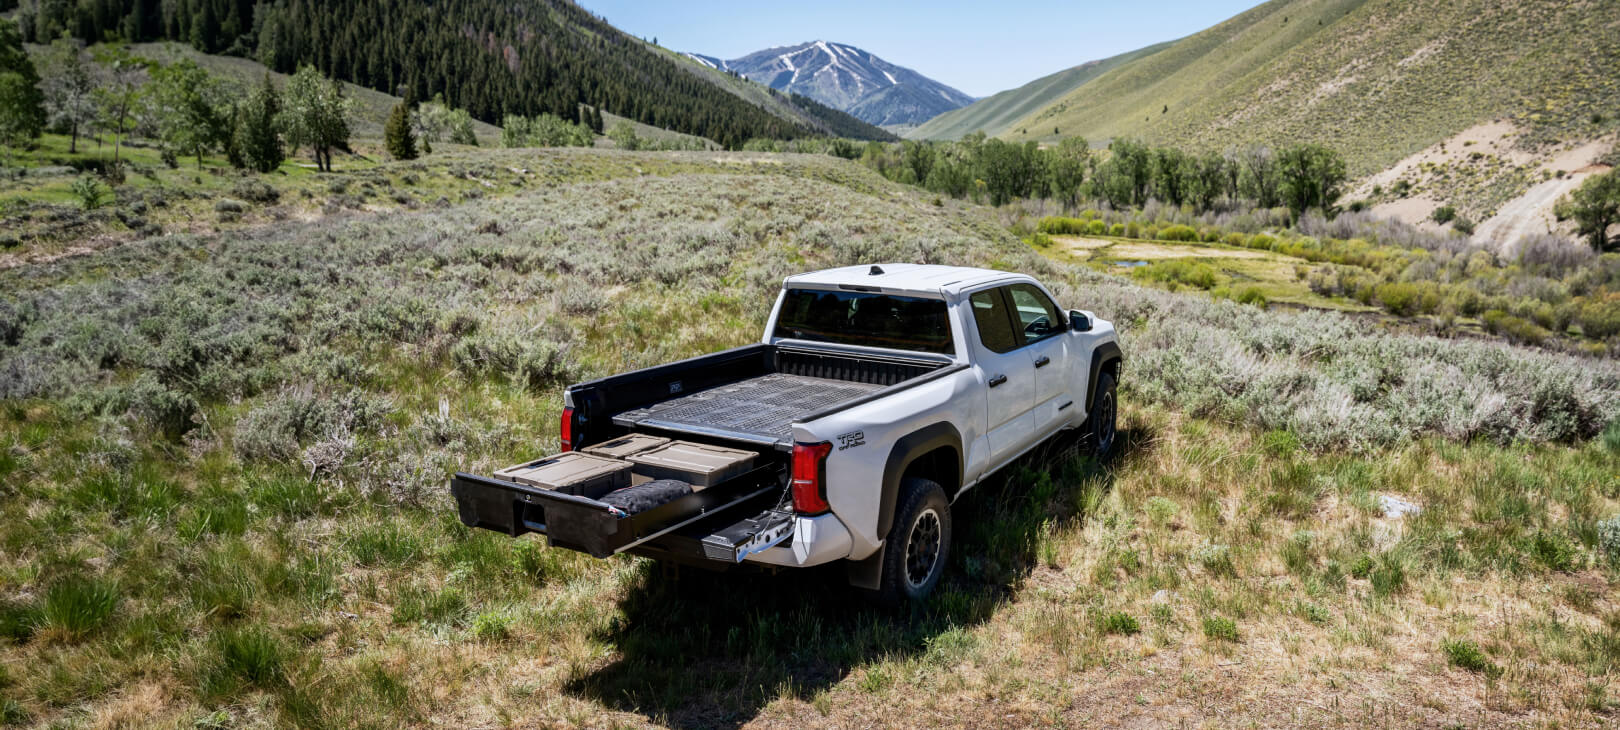 Wide view of a Toyota Tacoma's midsize Drawer System extended with a scenic mountain view in the background.